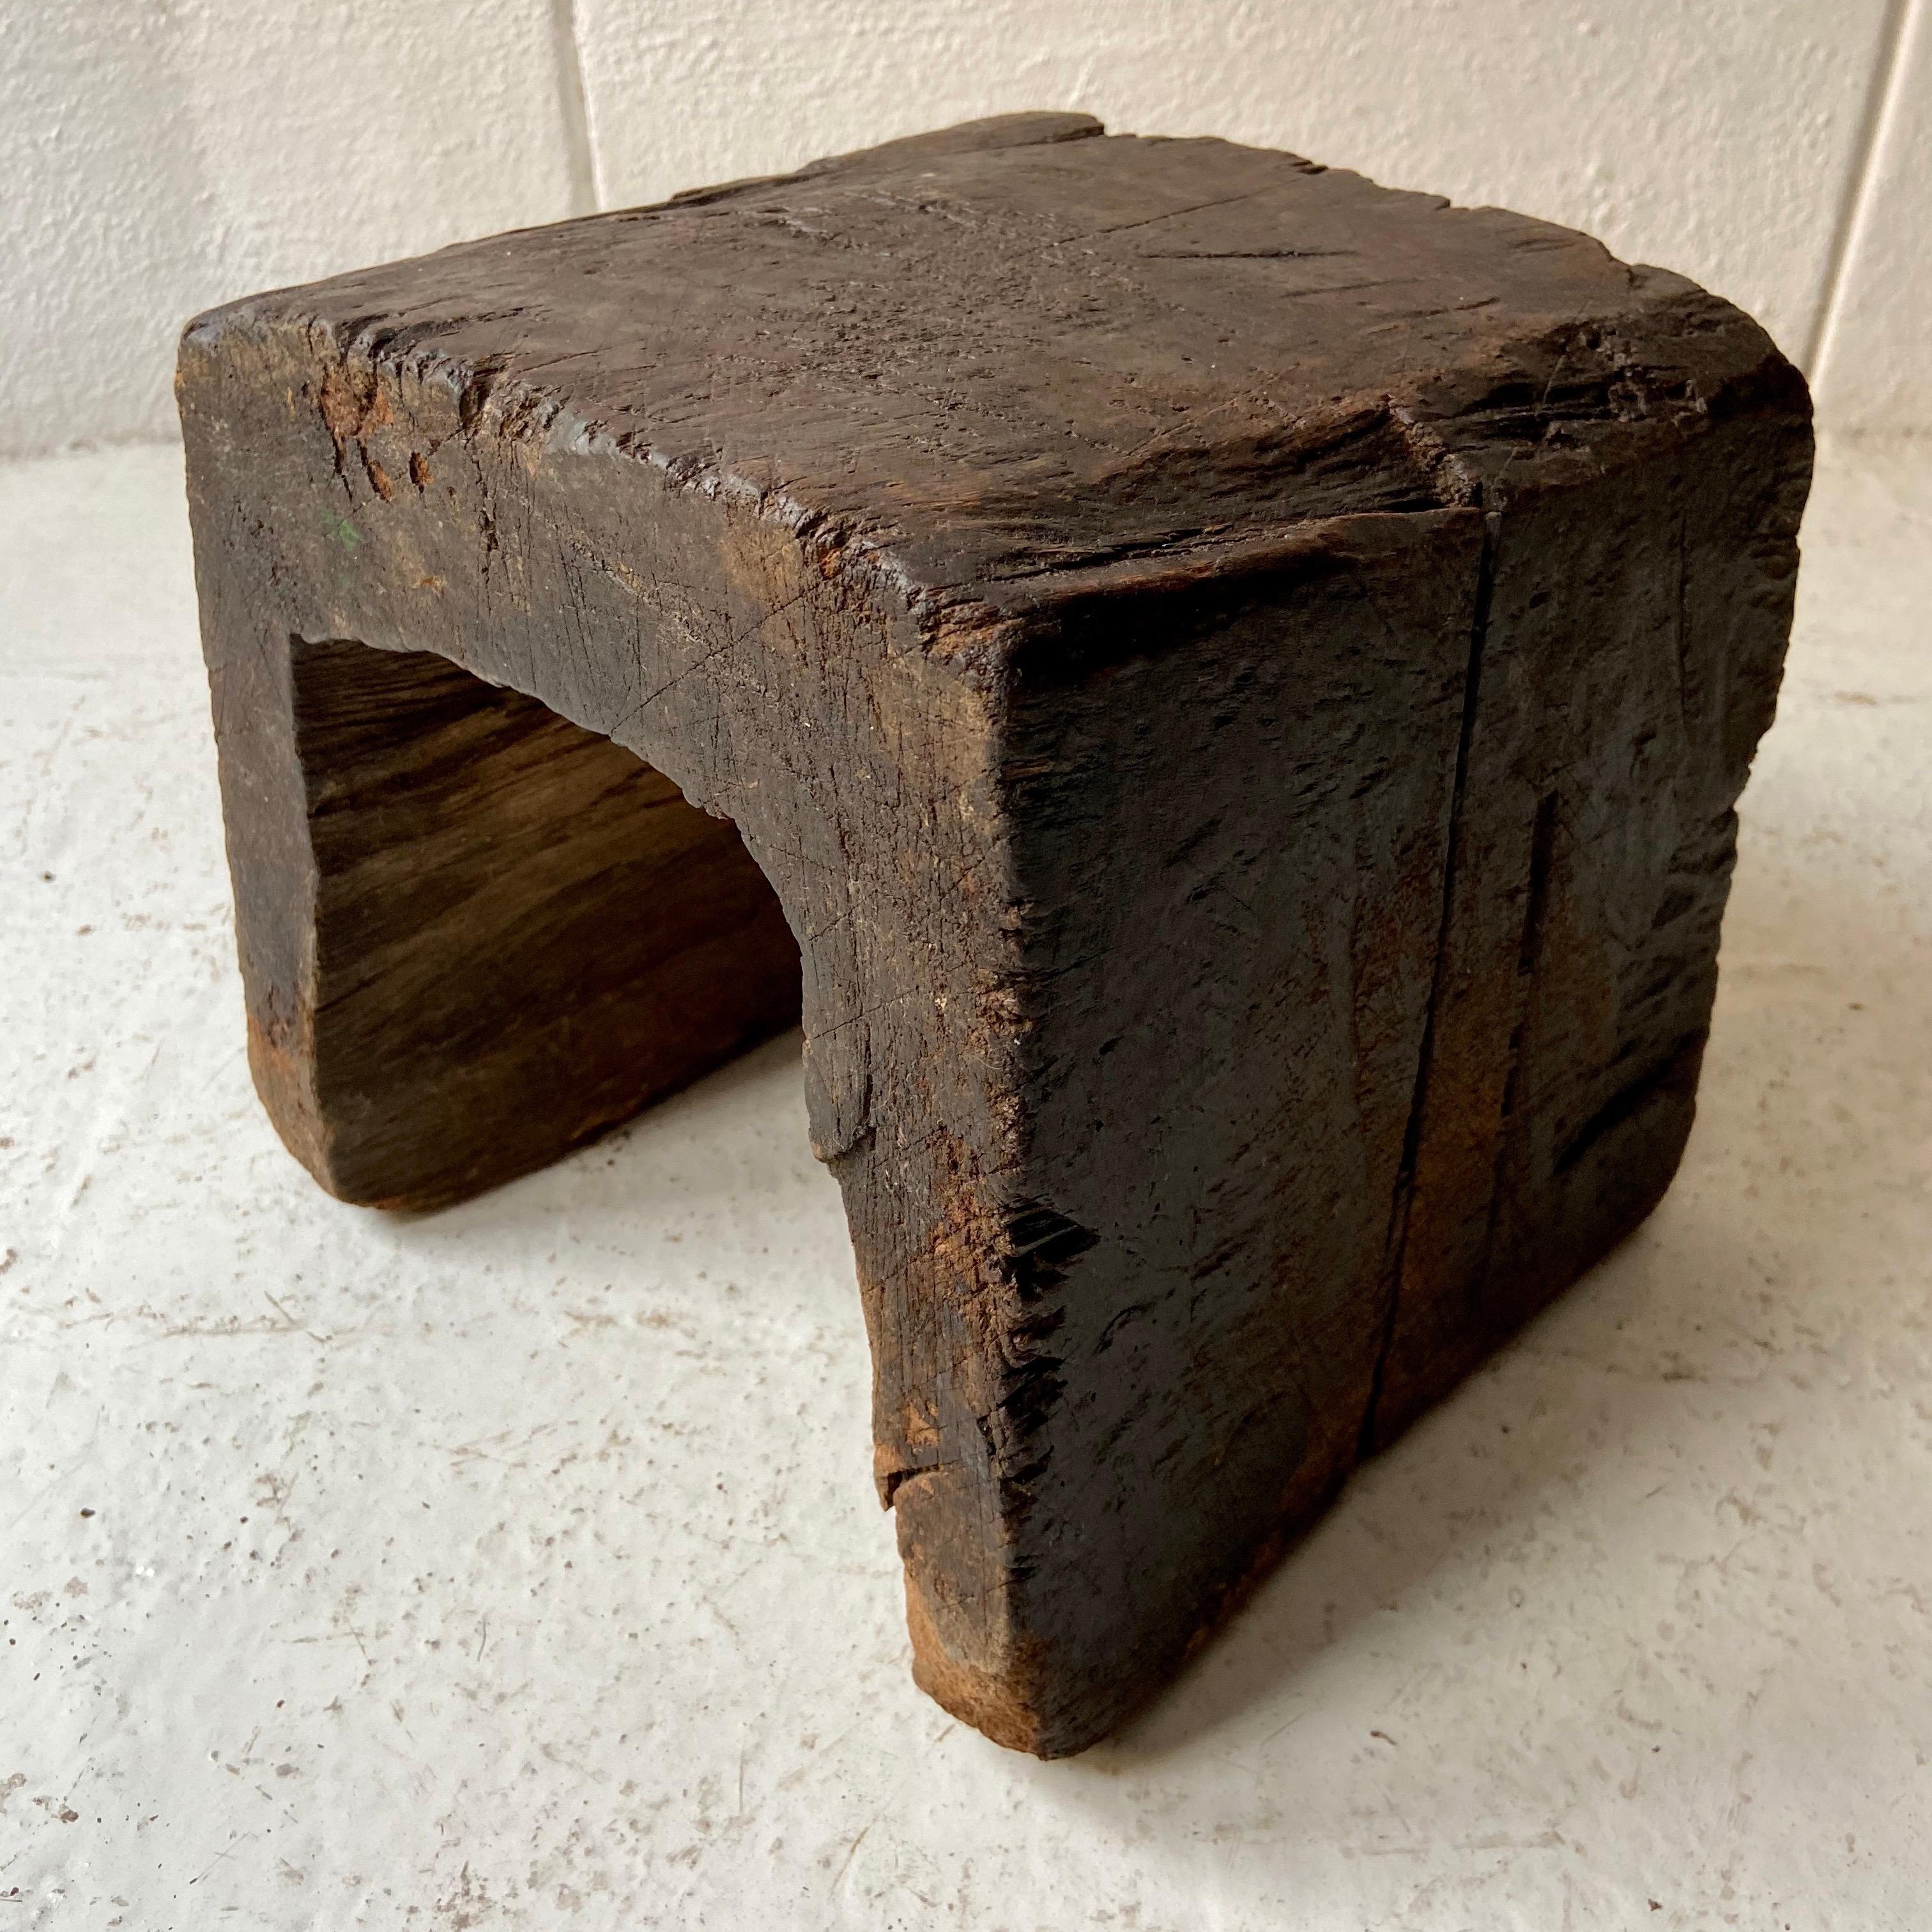 Rustic, hollowed out block stool from the northern mountains of Puebla. These are typically used by the fire to congregate and eat together. The patina on these pieces is important to note as a sign of their age and use.